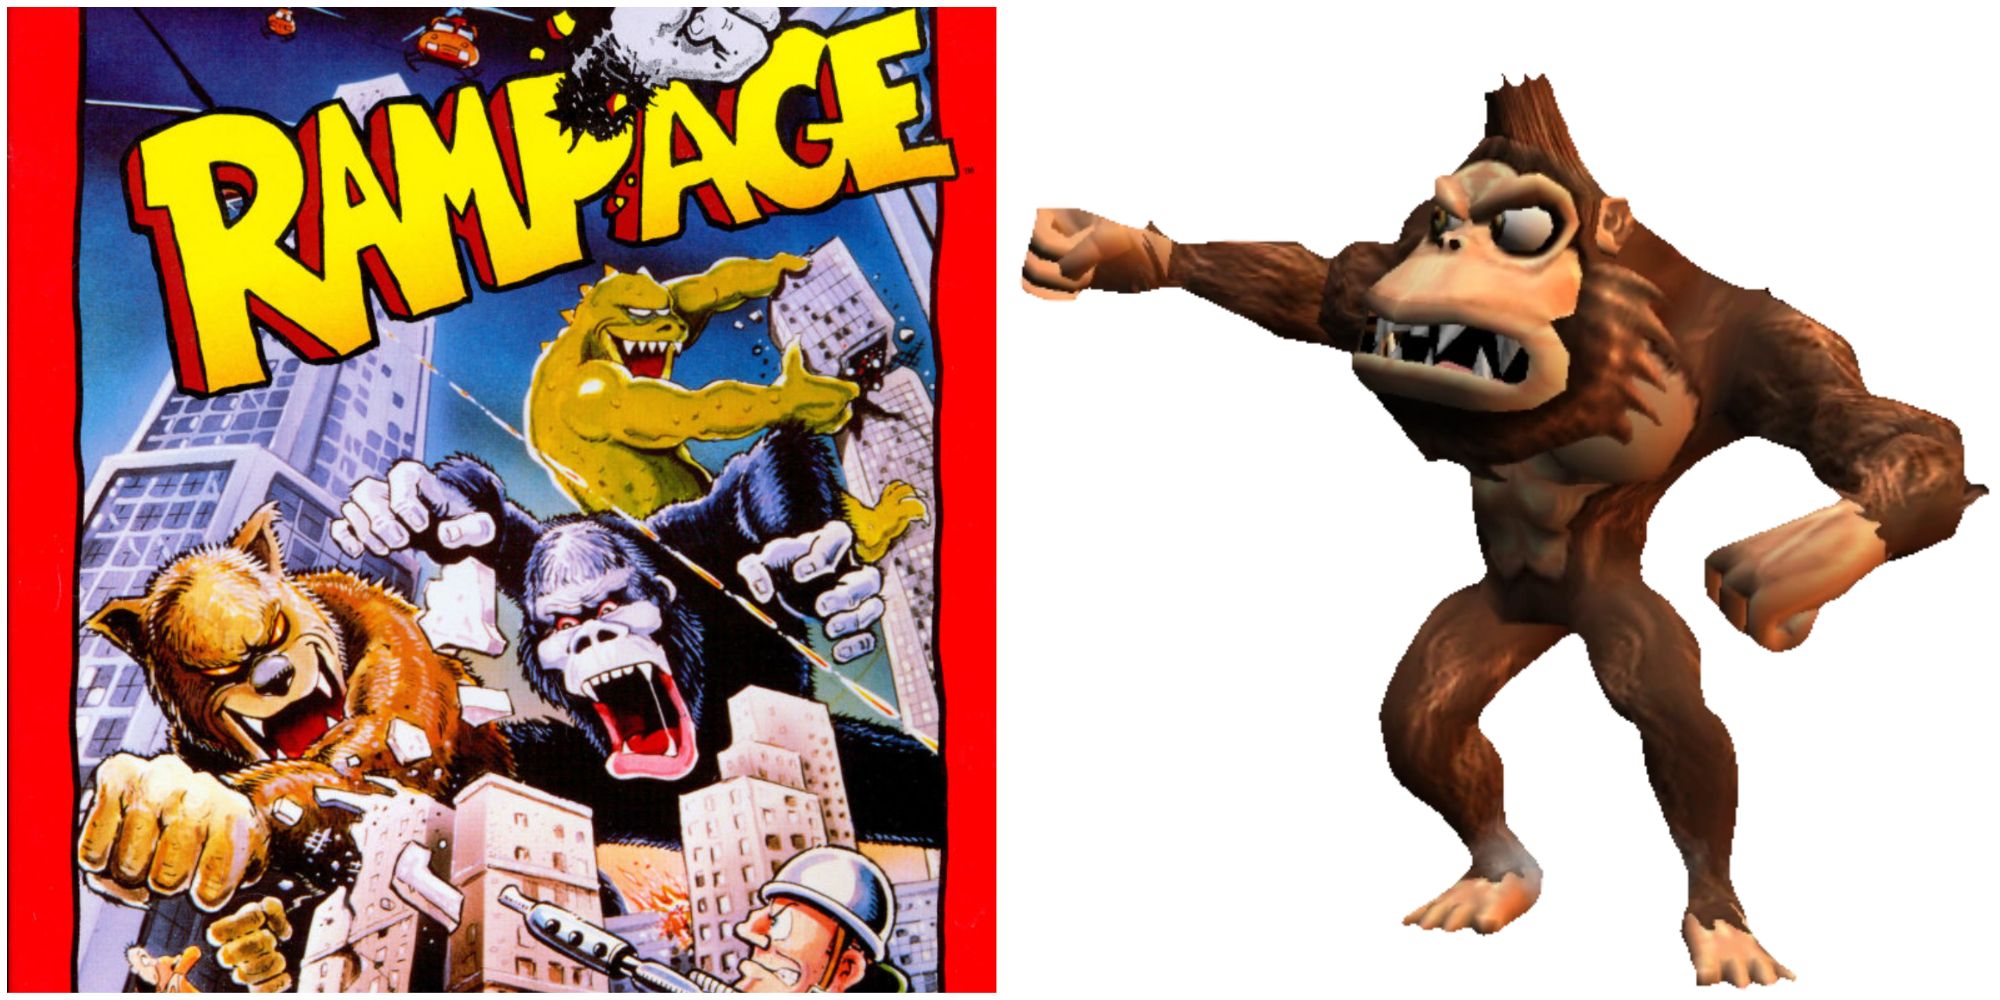 rampage cover & george